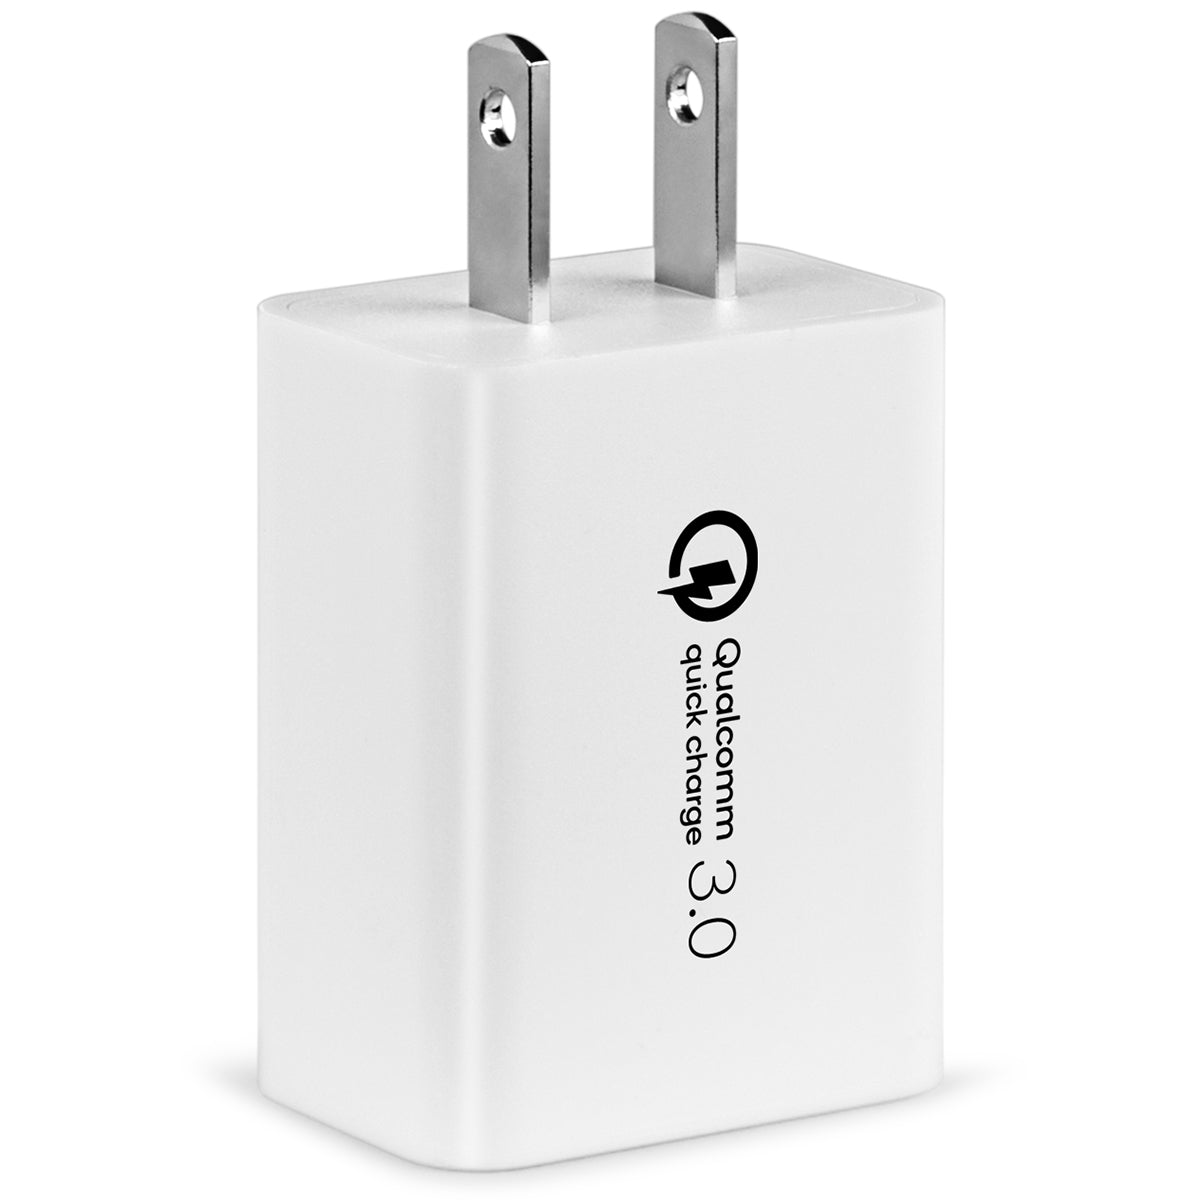 Cellairis Wall Charger - Single Qualcomm Quick Charge USB-A 3.0A White Wall Chargers